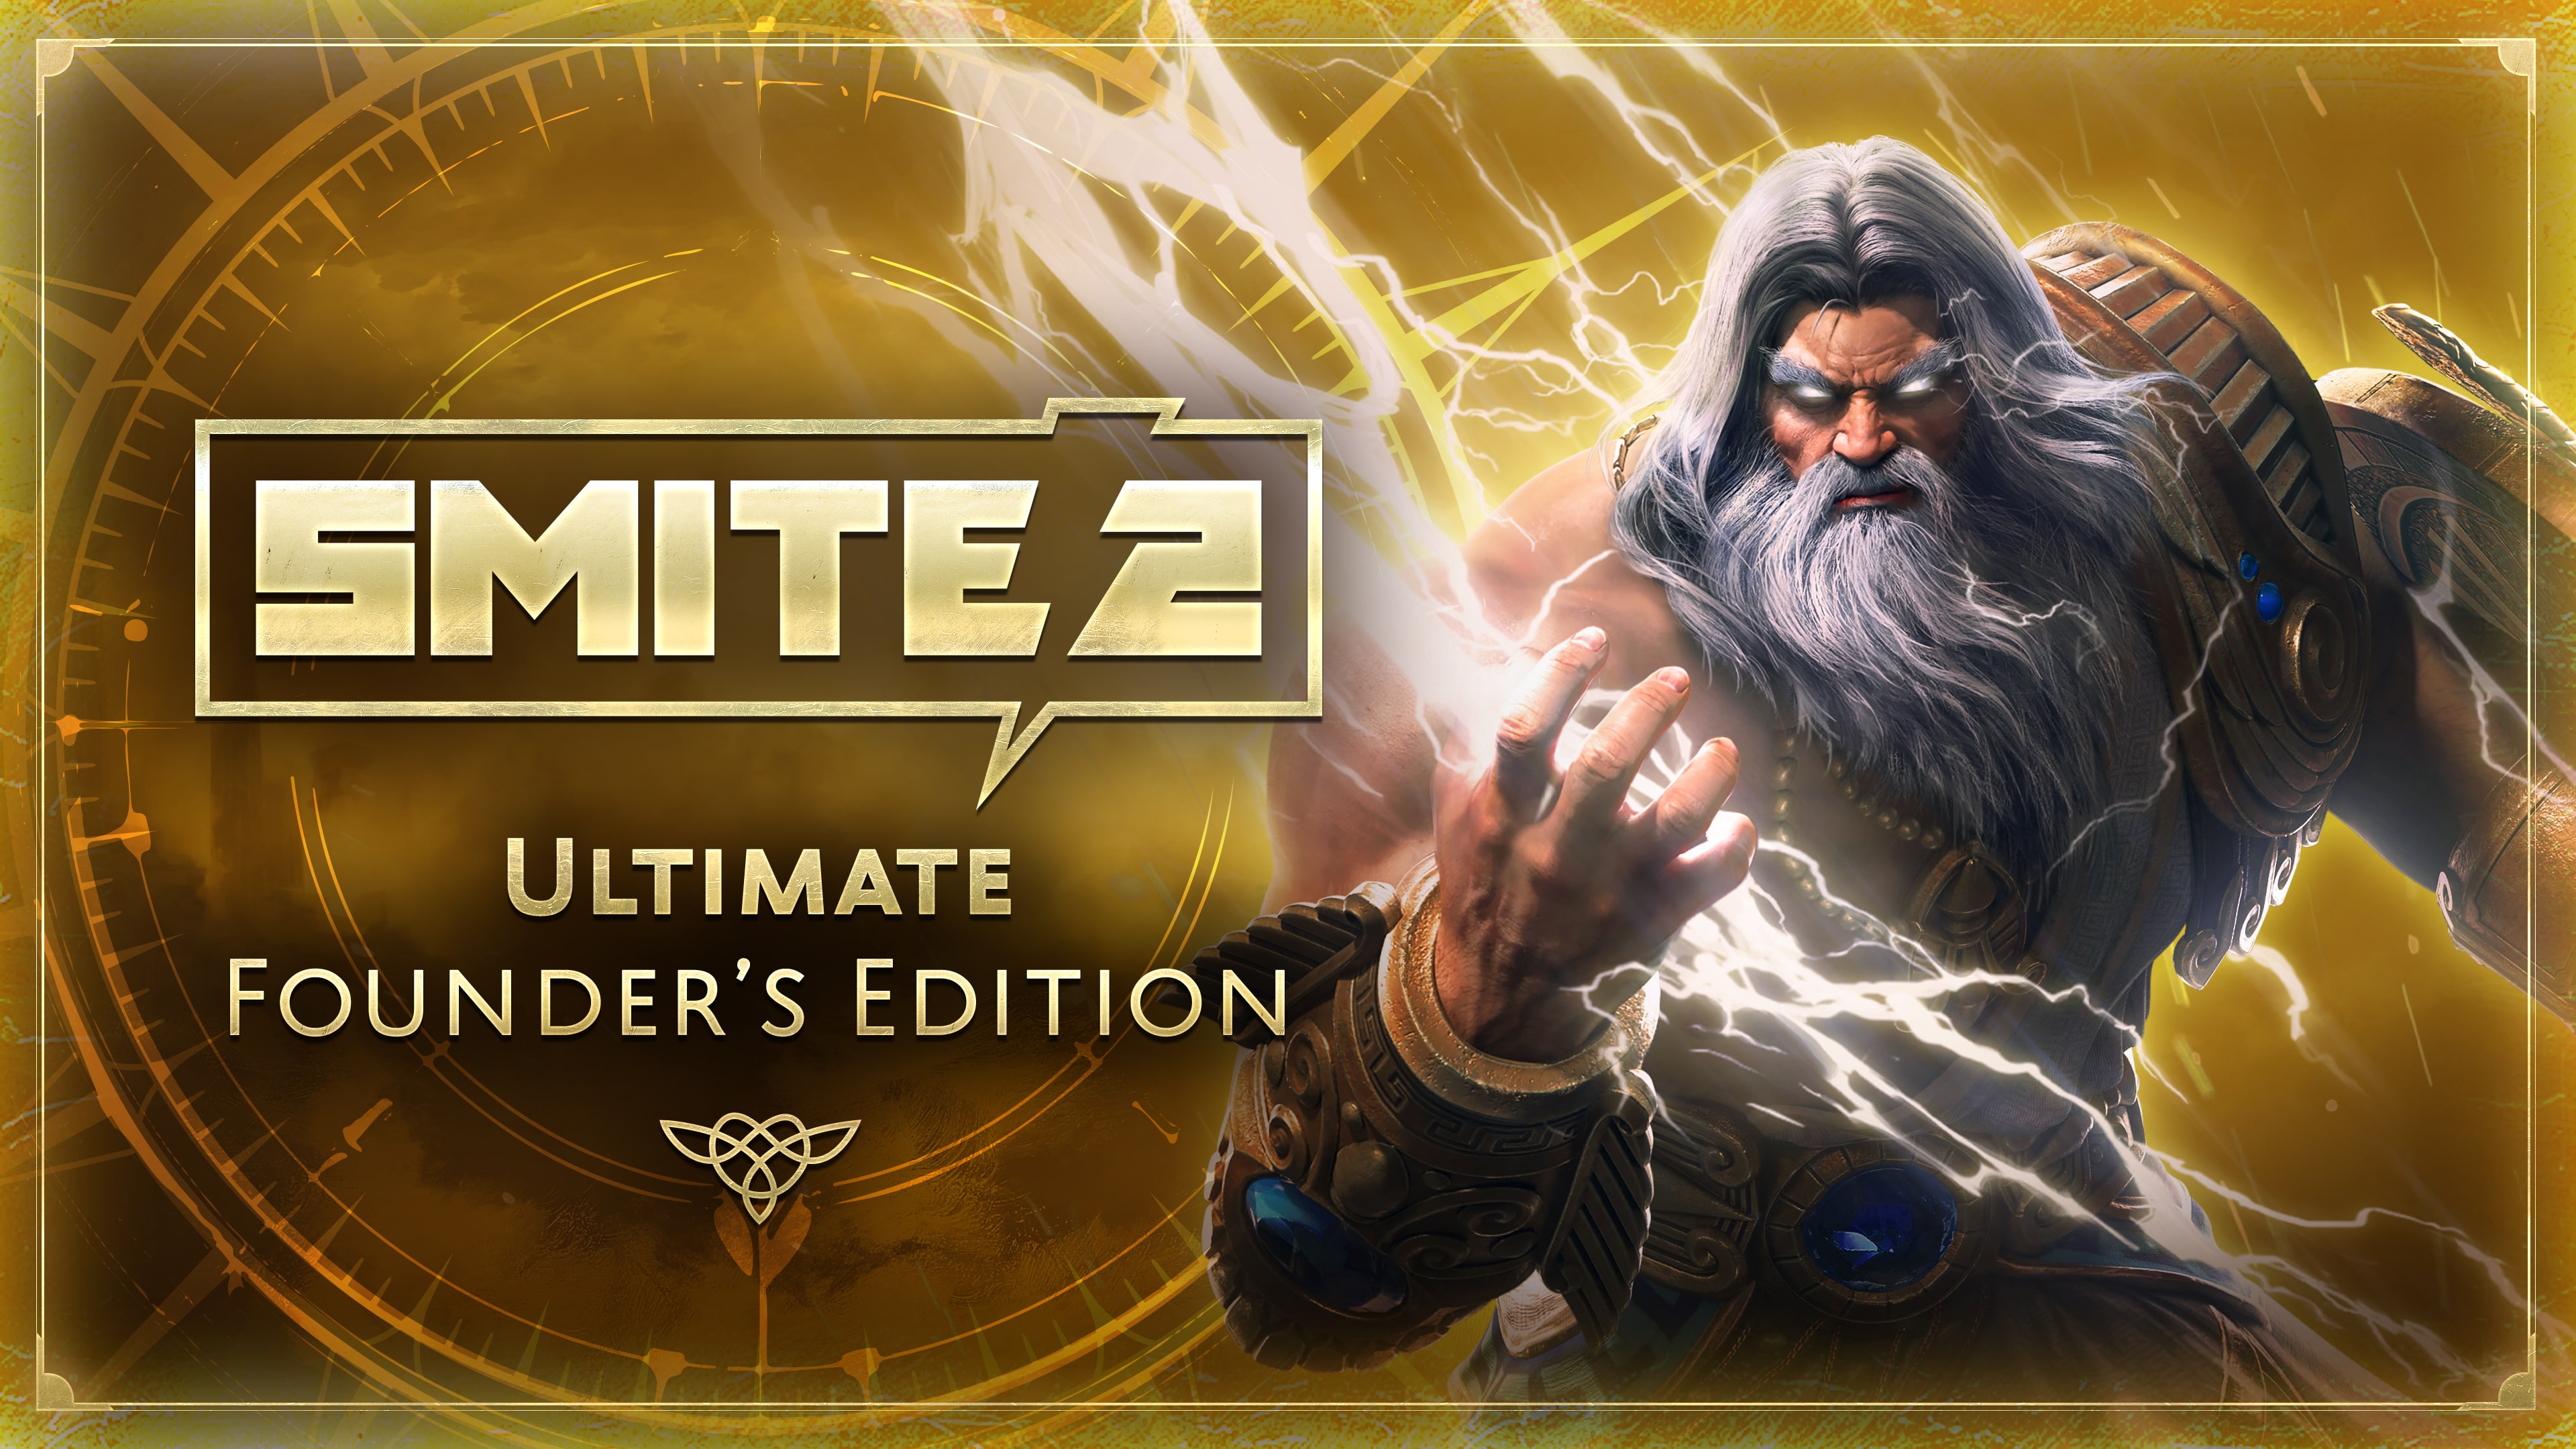 Ultimate Founder’s Edition